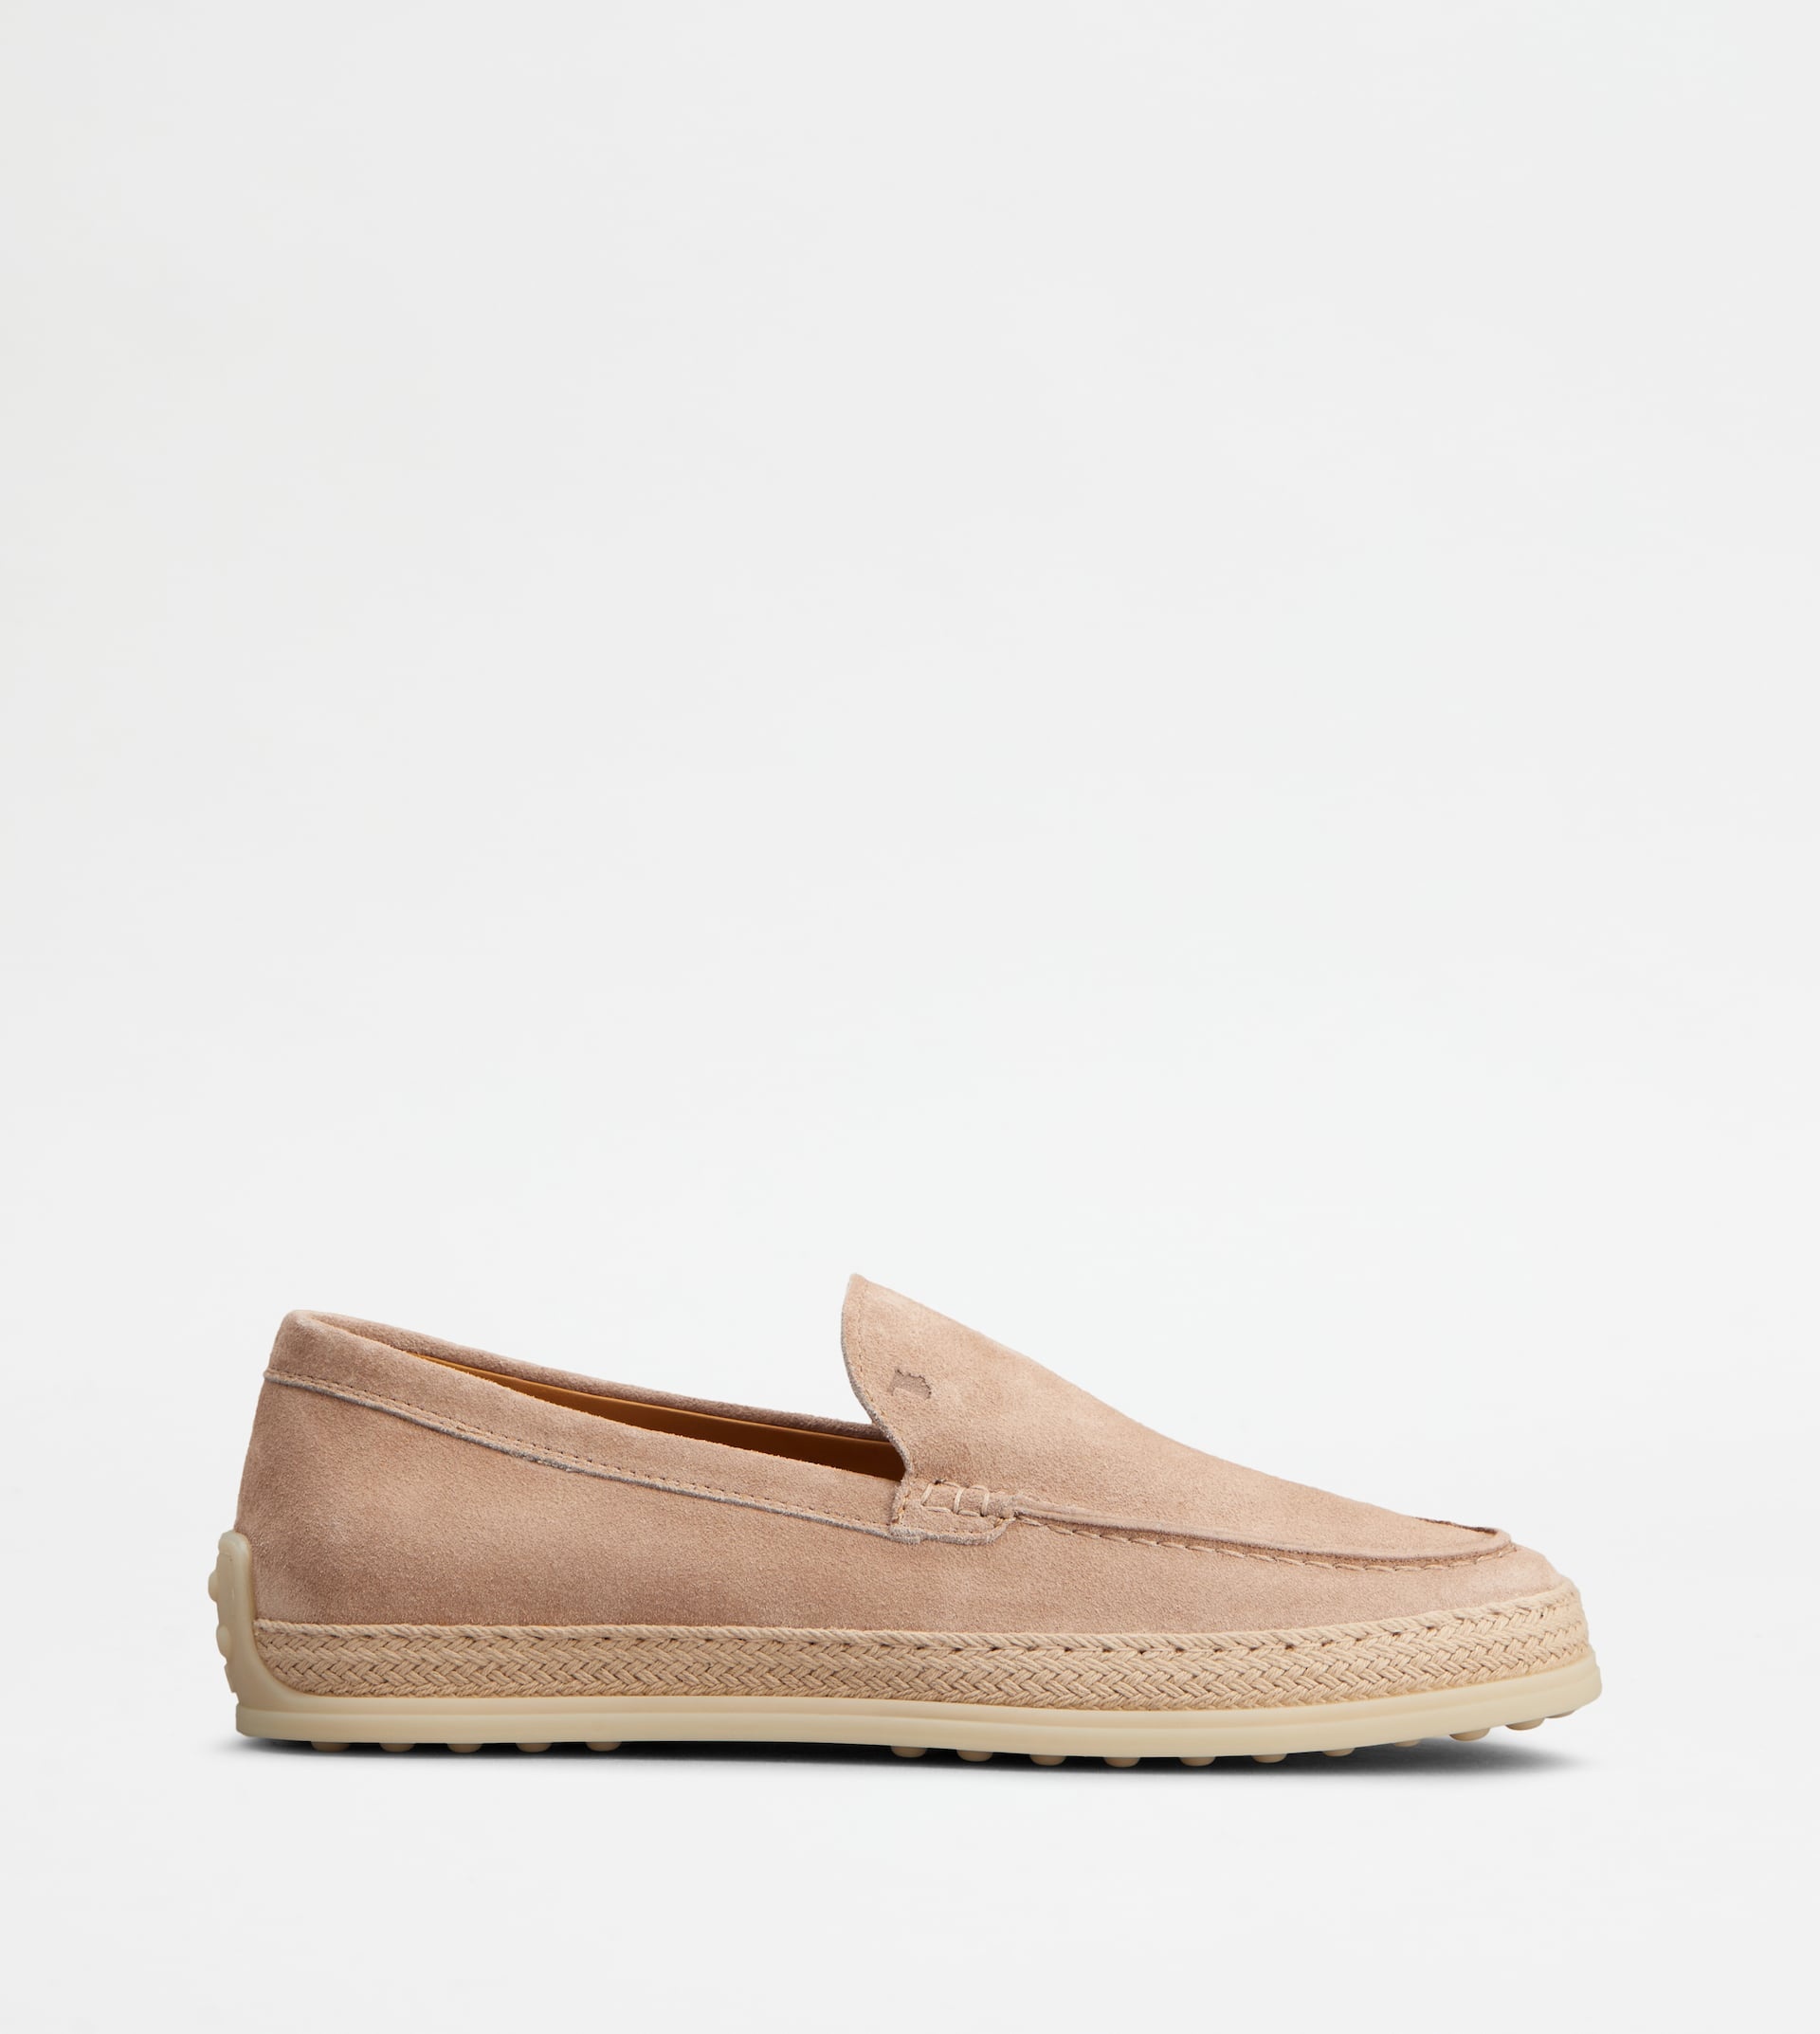 SLIPPER LOAFERS IN SUEDE - PINK - 1